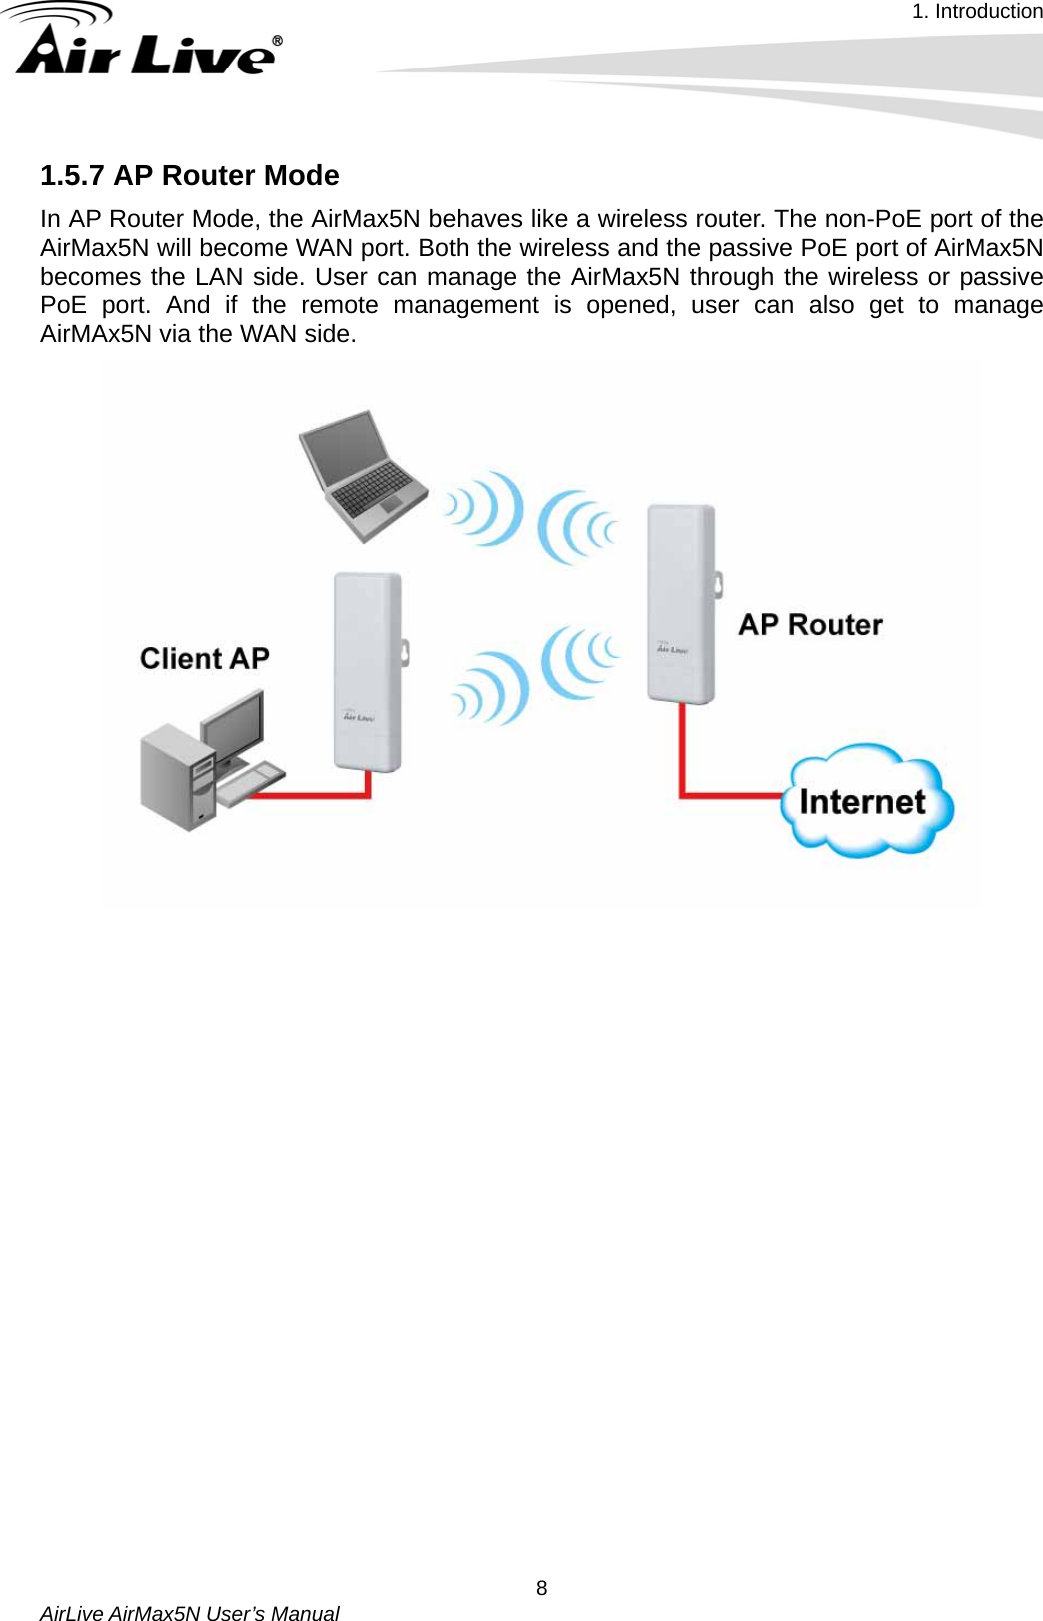 1. Introduction   AirLive AirMax5N User’s Manual  81.5.7 AP Router Mode In AP Router Mode, the AirMax5N behaves like a wireless router. The non-PoE port of the AirMax5N will become WAN port. Both the wireless and the passive PoE port of AirMax5N becomes the LAN side. User can manage the AirMax5N through the wireless or passive PoE port. And if the remote management is opened, user can also get to manage AirMAx5N via the WAN side.   